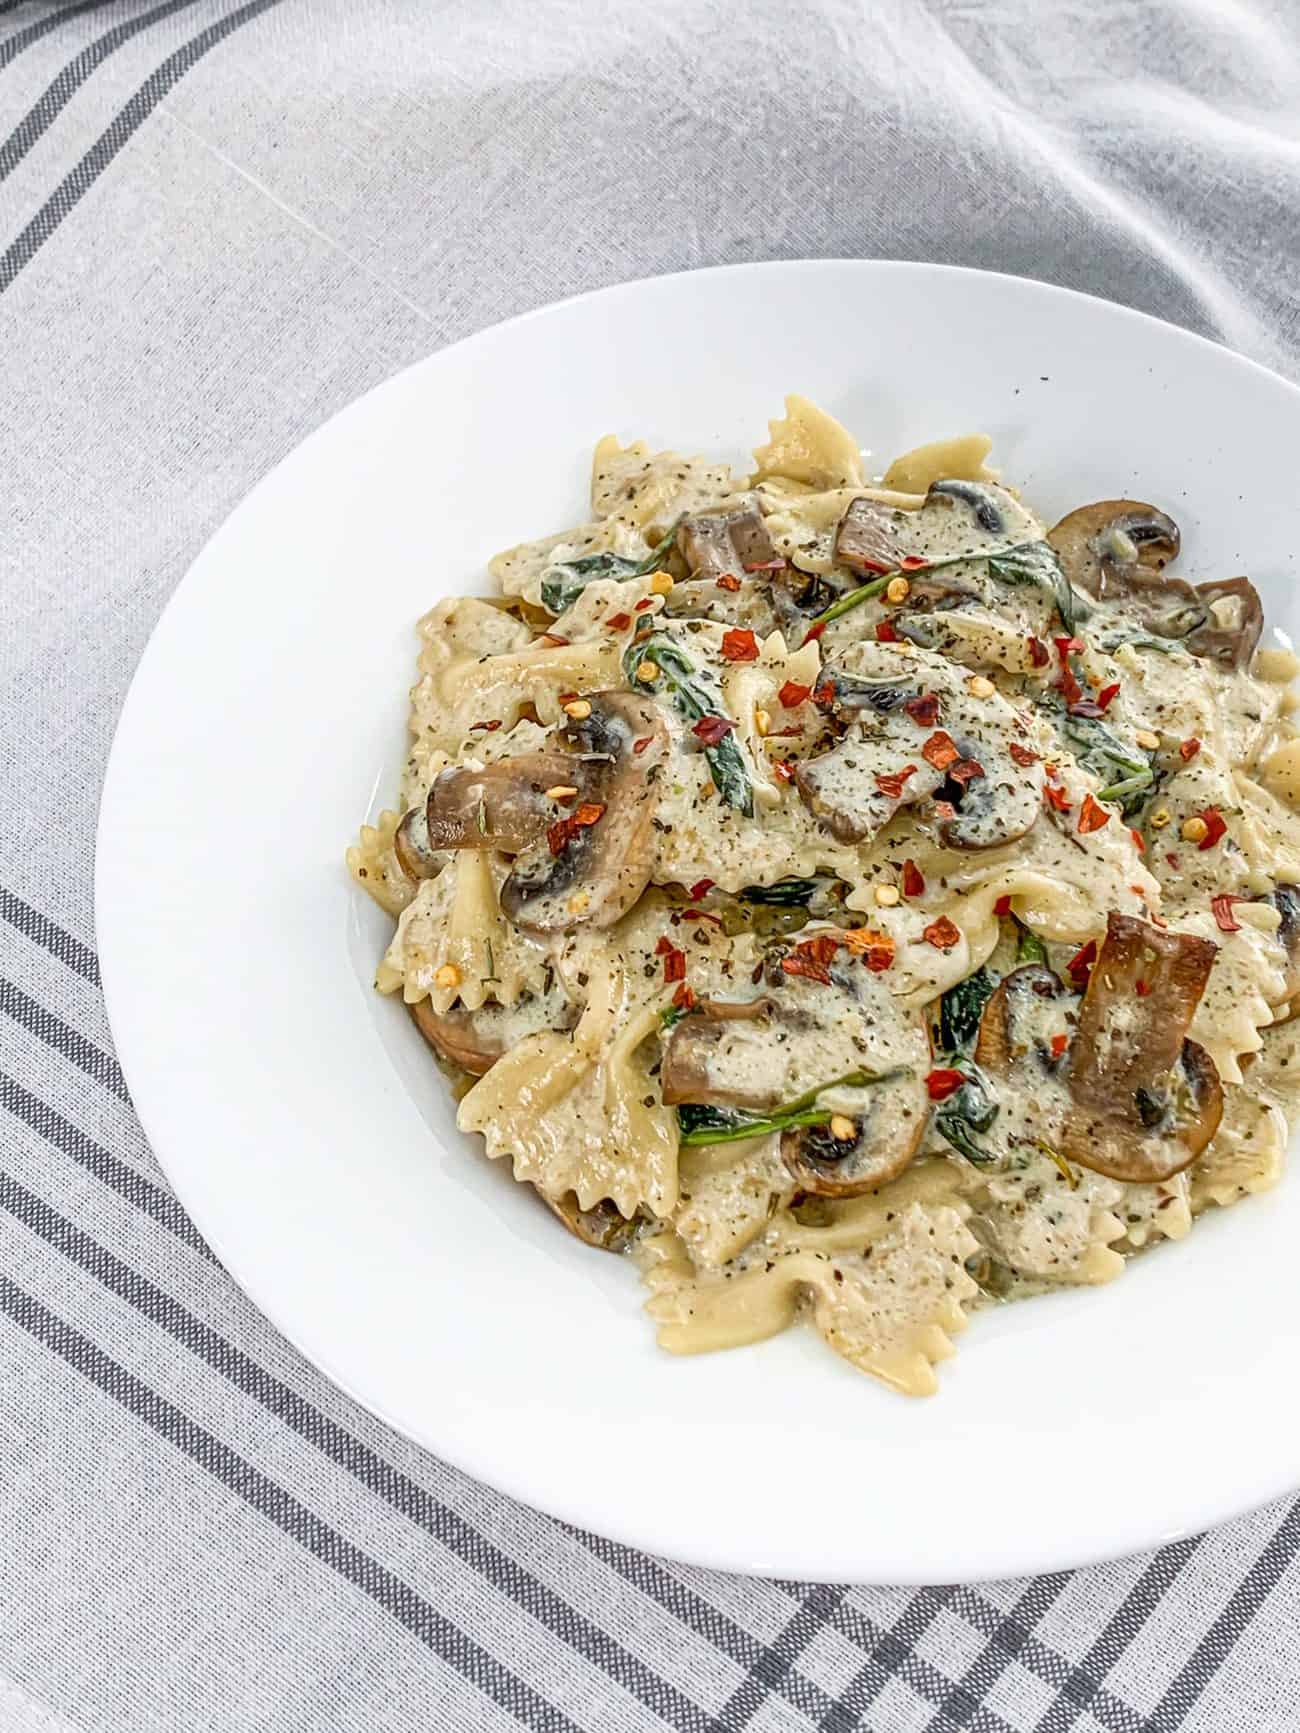 One Pot Garlic Parmesan Pasta with Spinach and Mushrooms